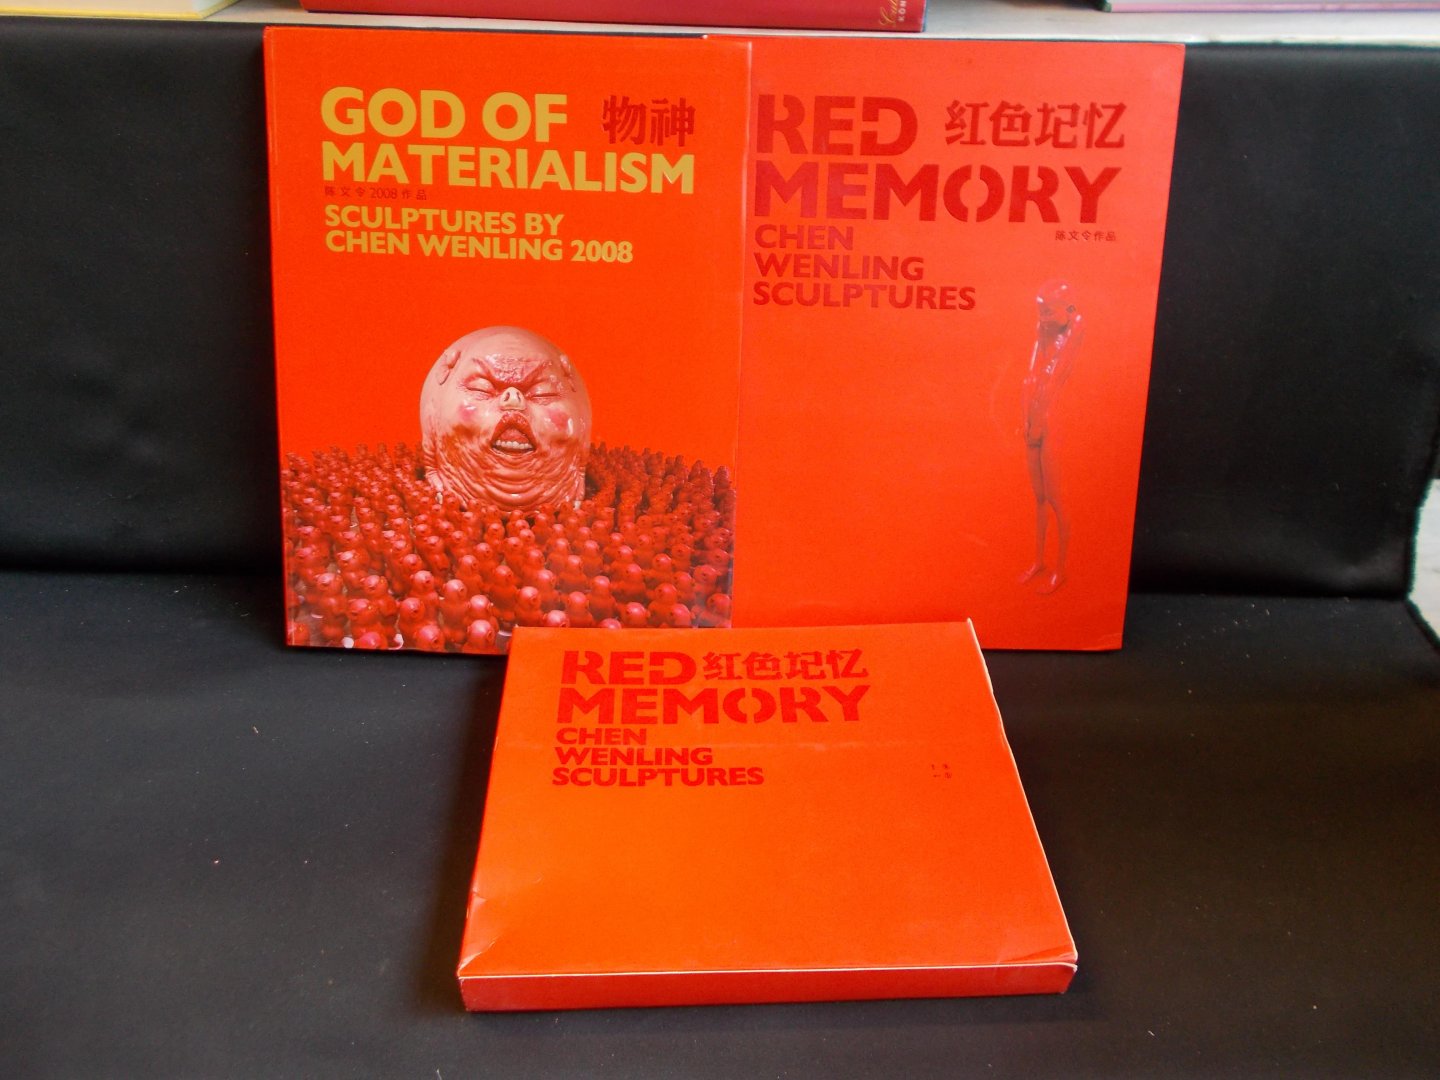 Du, Huang - God of Materialism & Red Memory. Sculptures by Chen Wenling 2008.